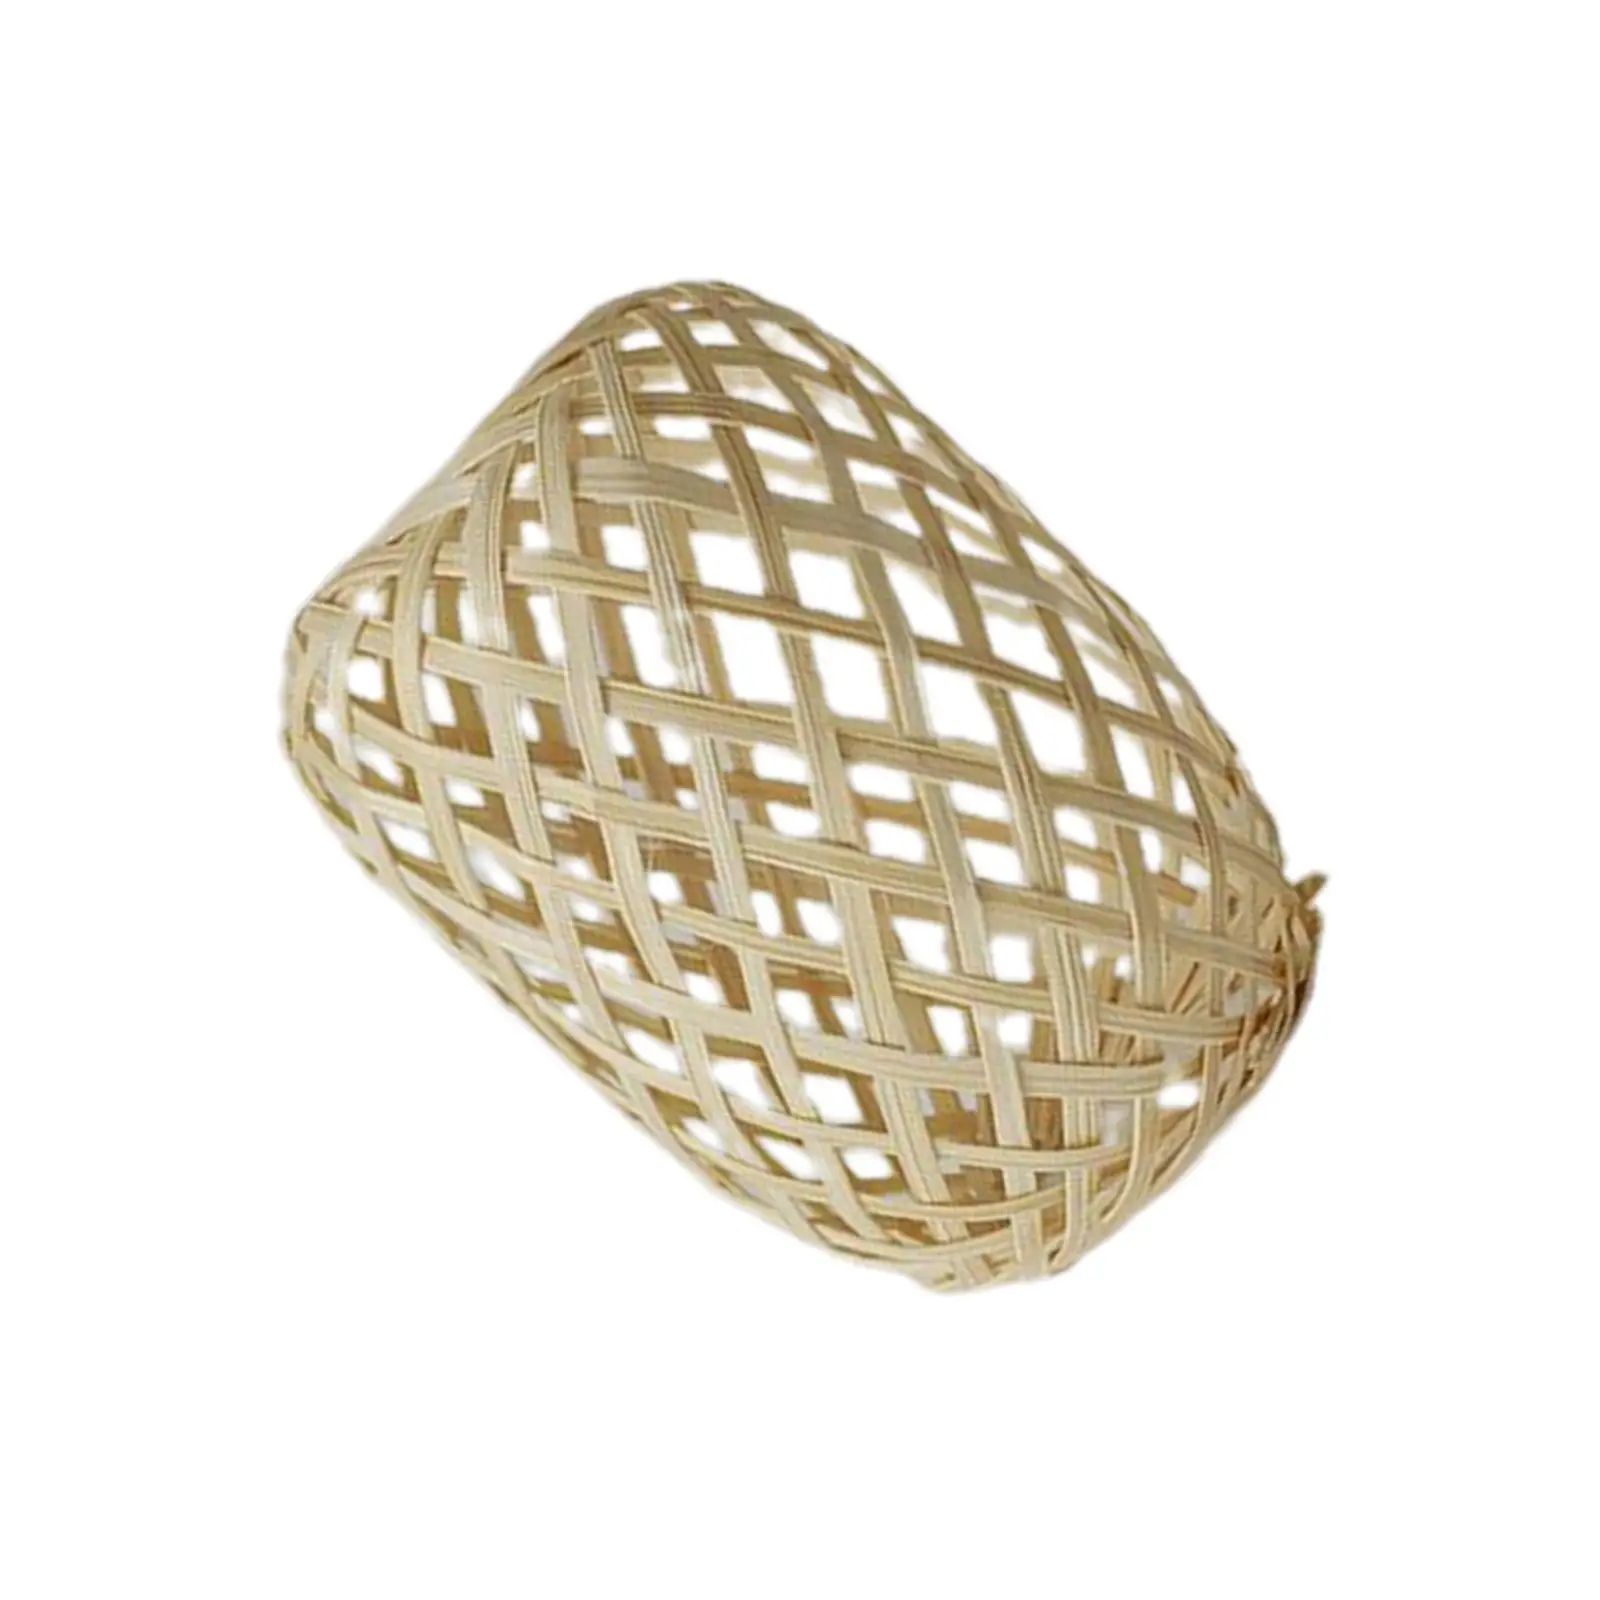 Retro Style Lantern Ornament Bamboo Woven Lamp Shade for Bedroom Living Room Auto